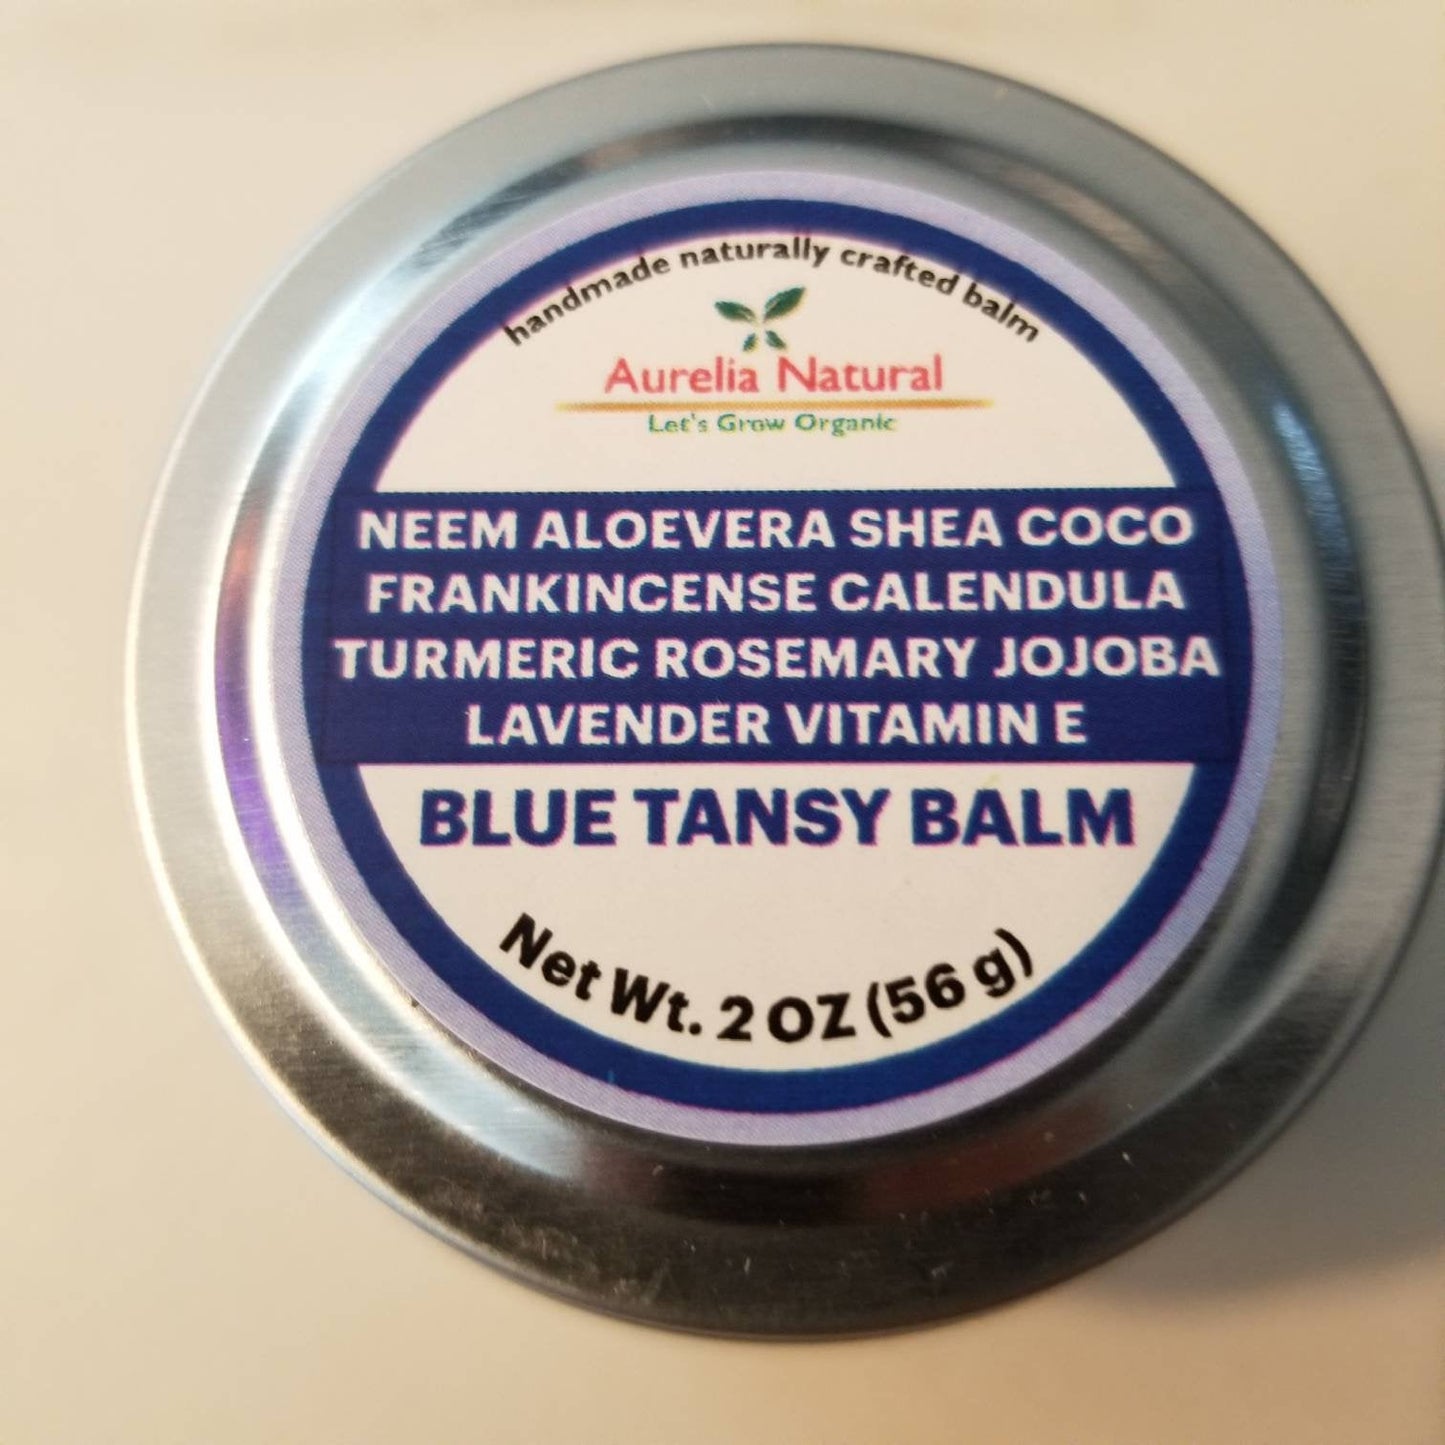 Luxurious Blue Tansy Manuka Honey Face Balm Soothe Cool Irritated Skin High quality Handcrafted